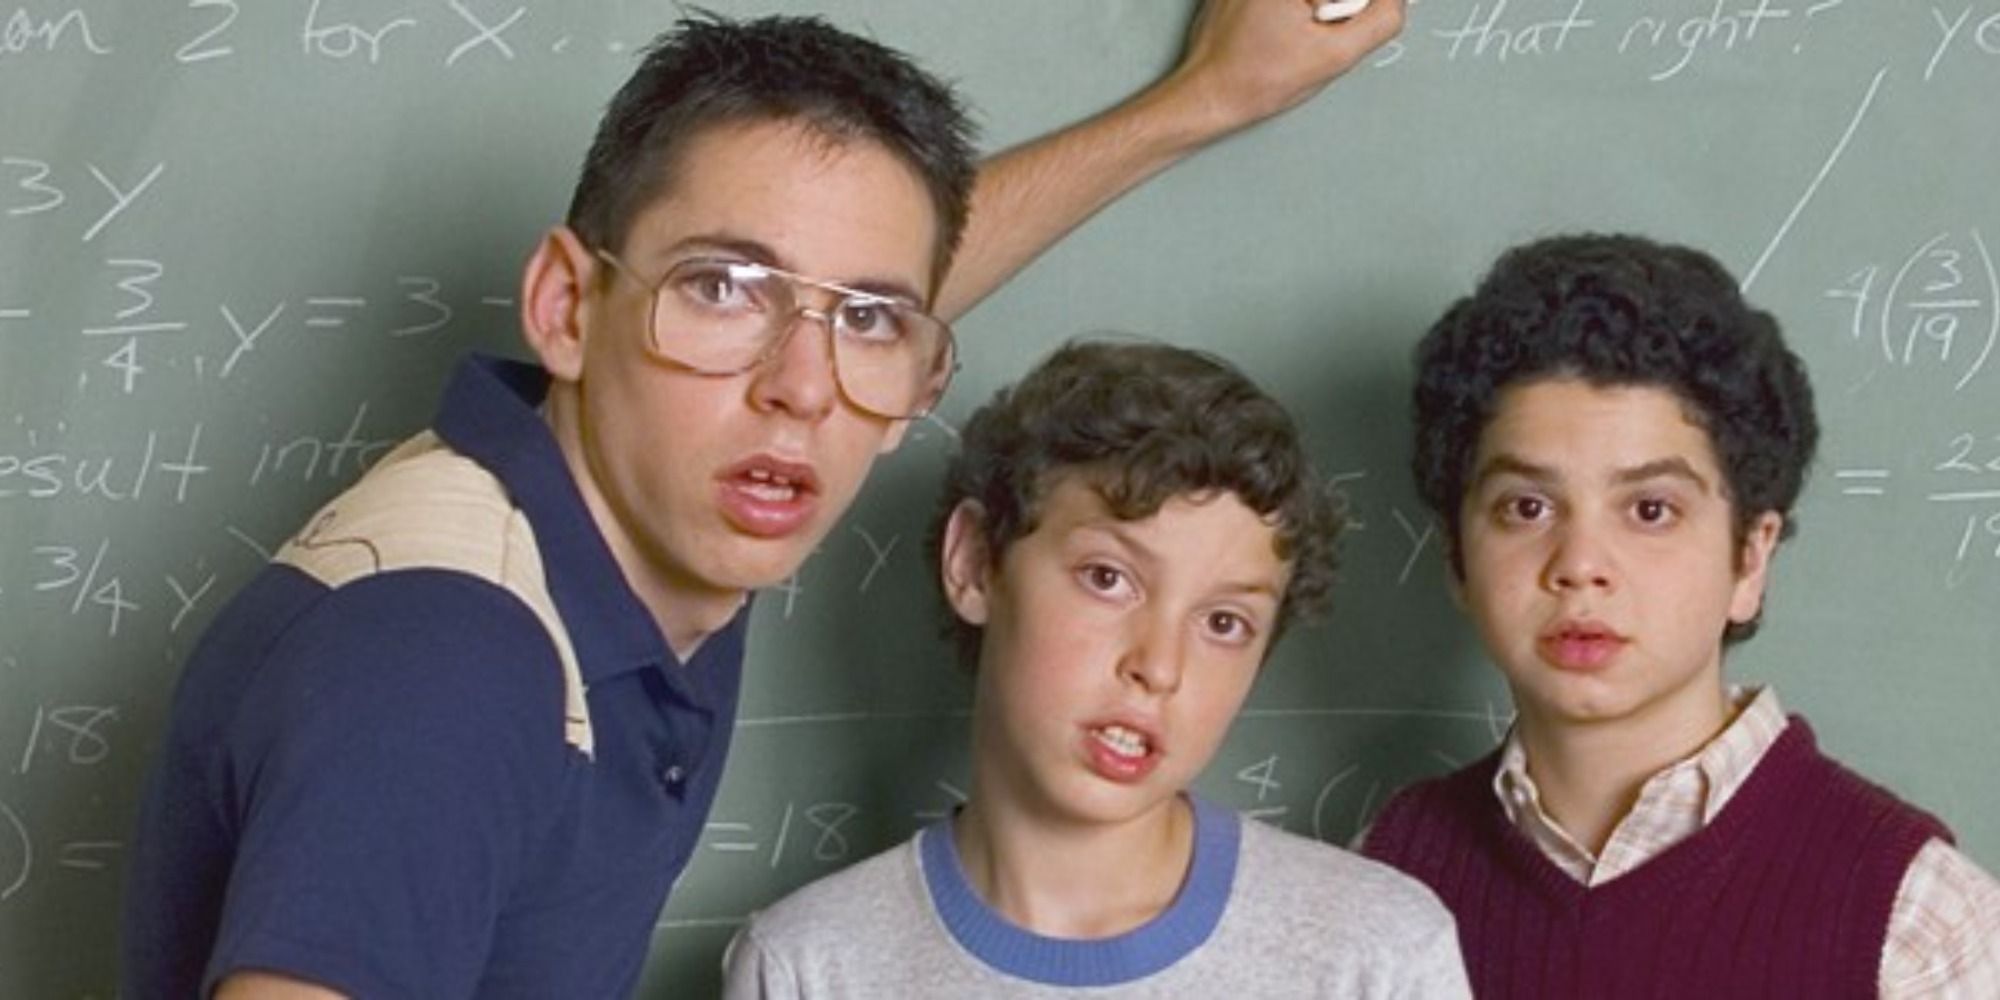 The Geeks posing for a shot in Freaks and Geeks